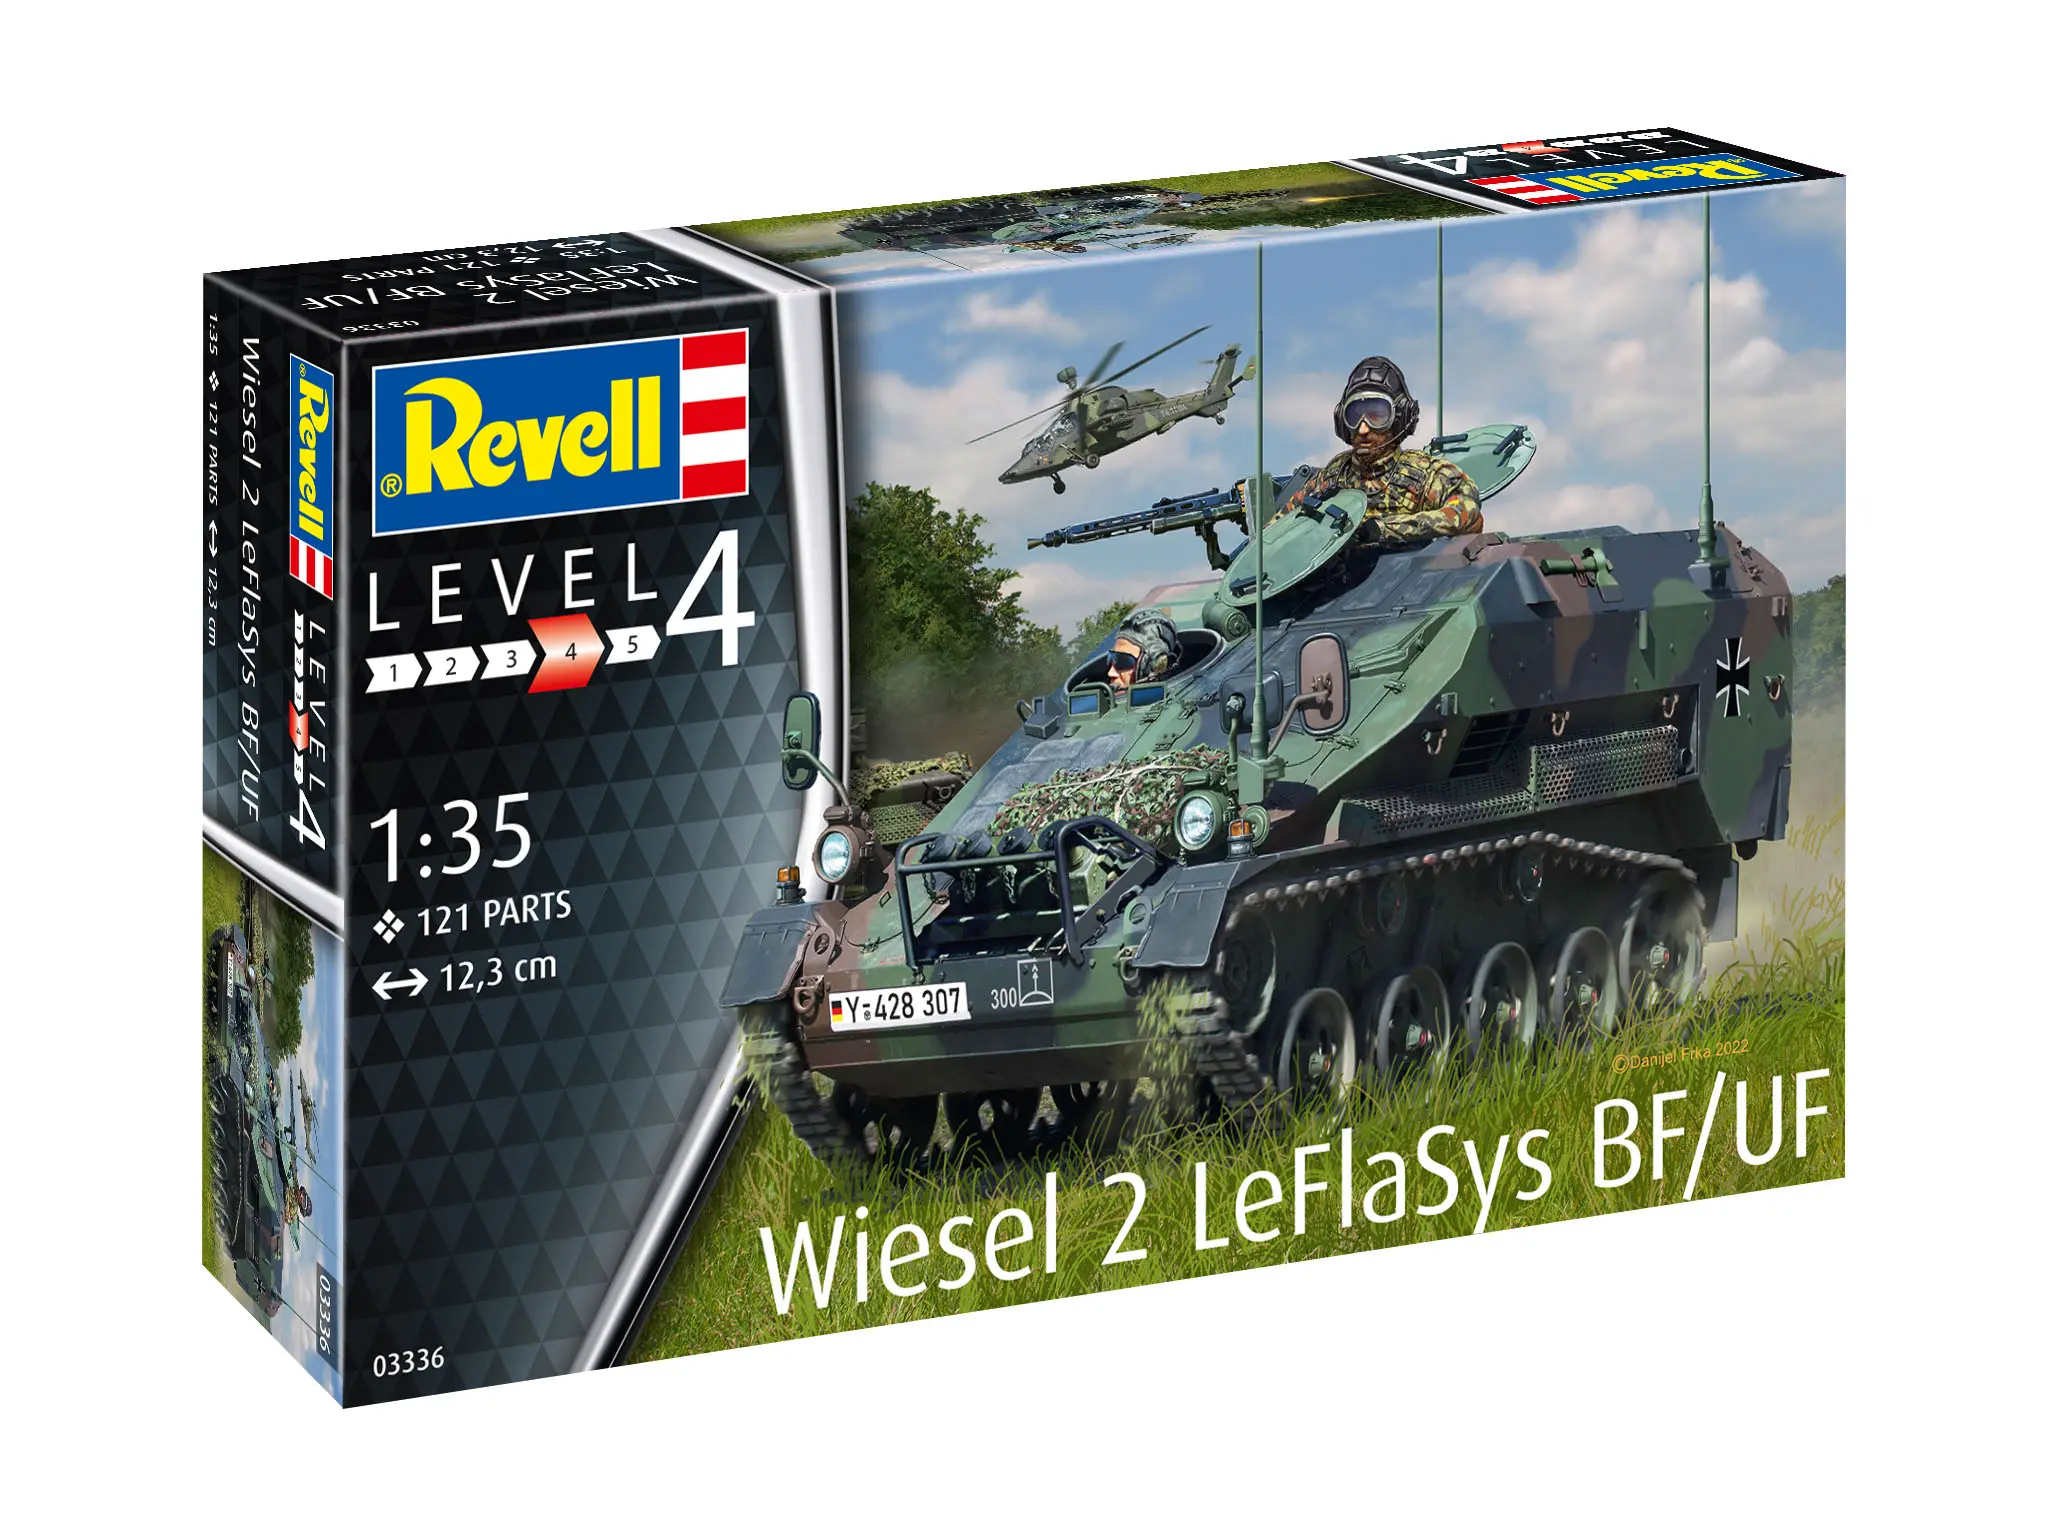 Revell 03336 - Wiesel 2 LeFlaSys BF/UF